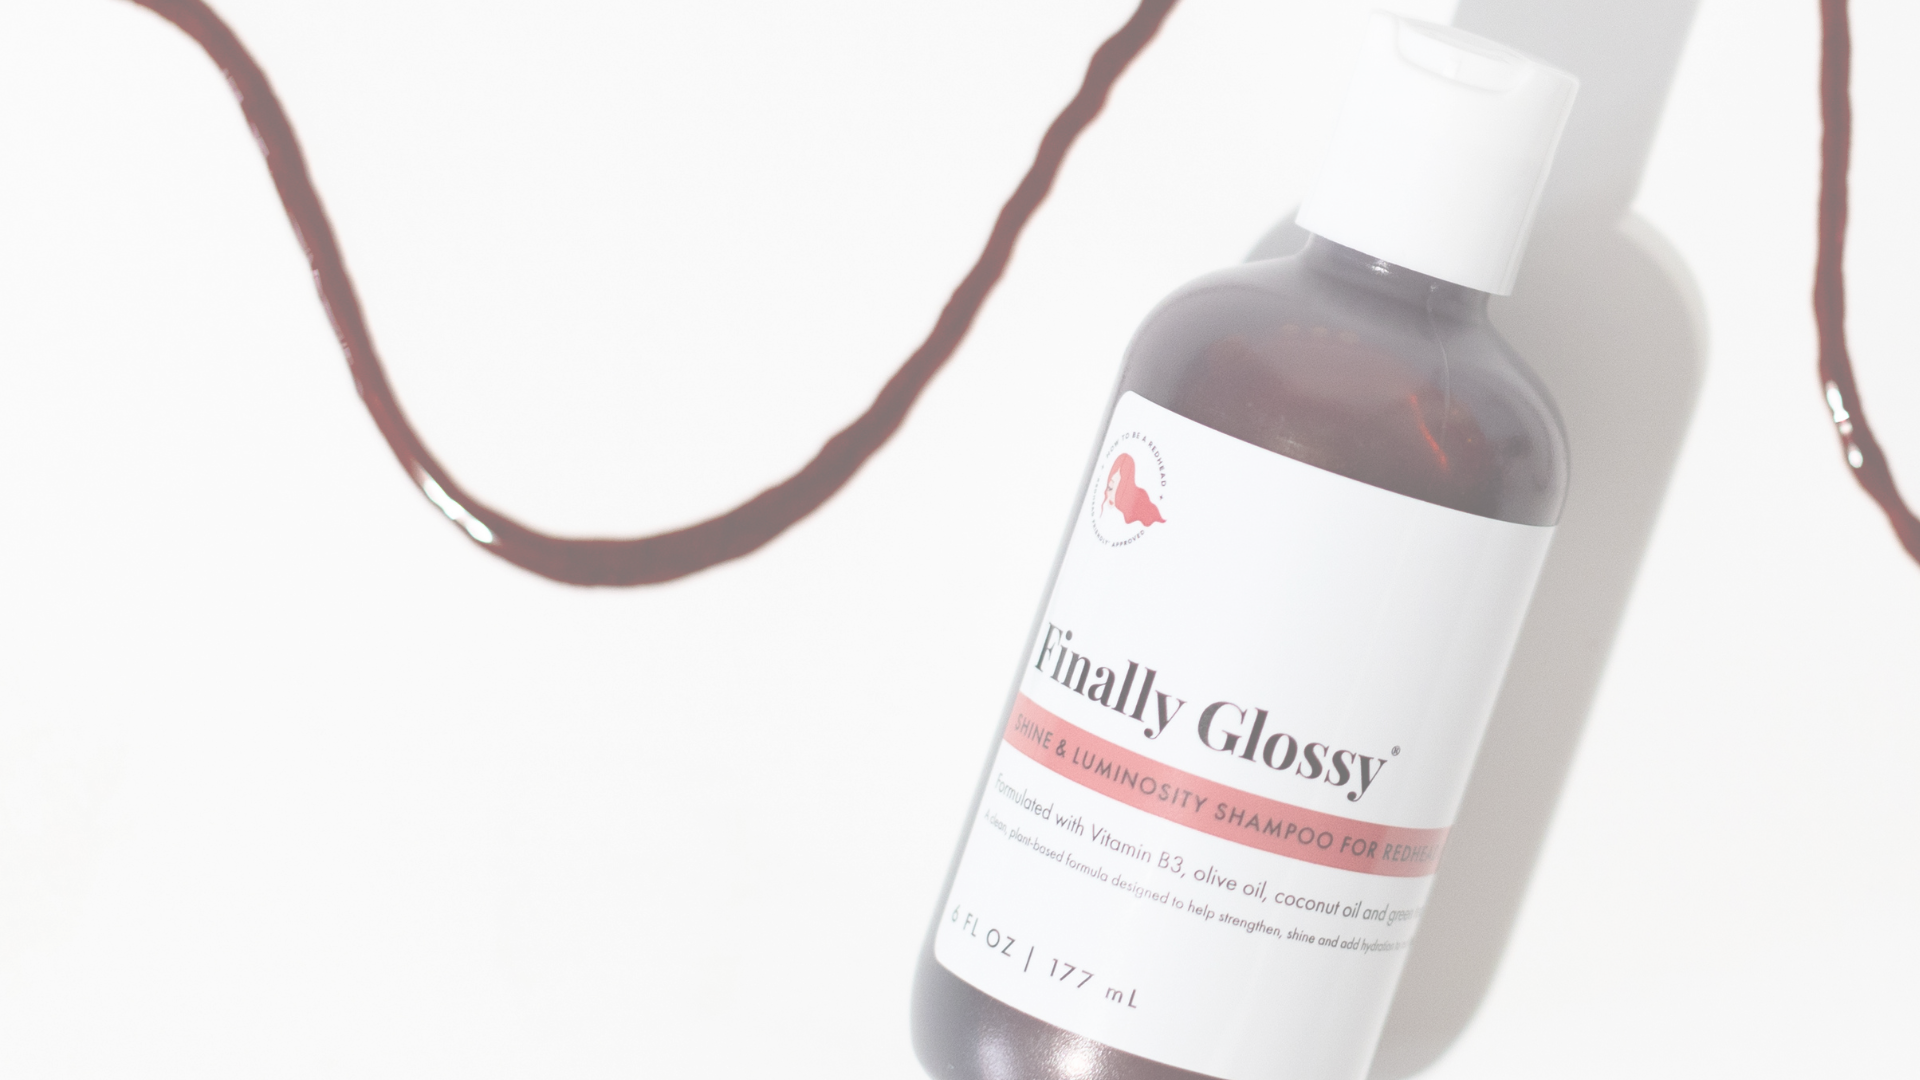 Finally Glossy Isn’t a Color Depositing Shampoo, So Why Is It Red?